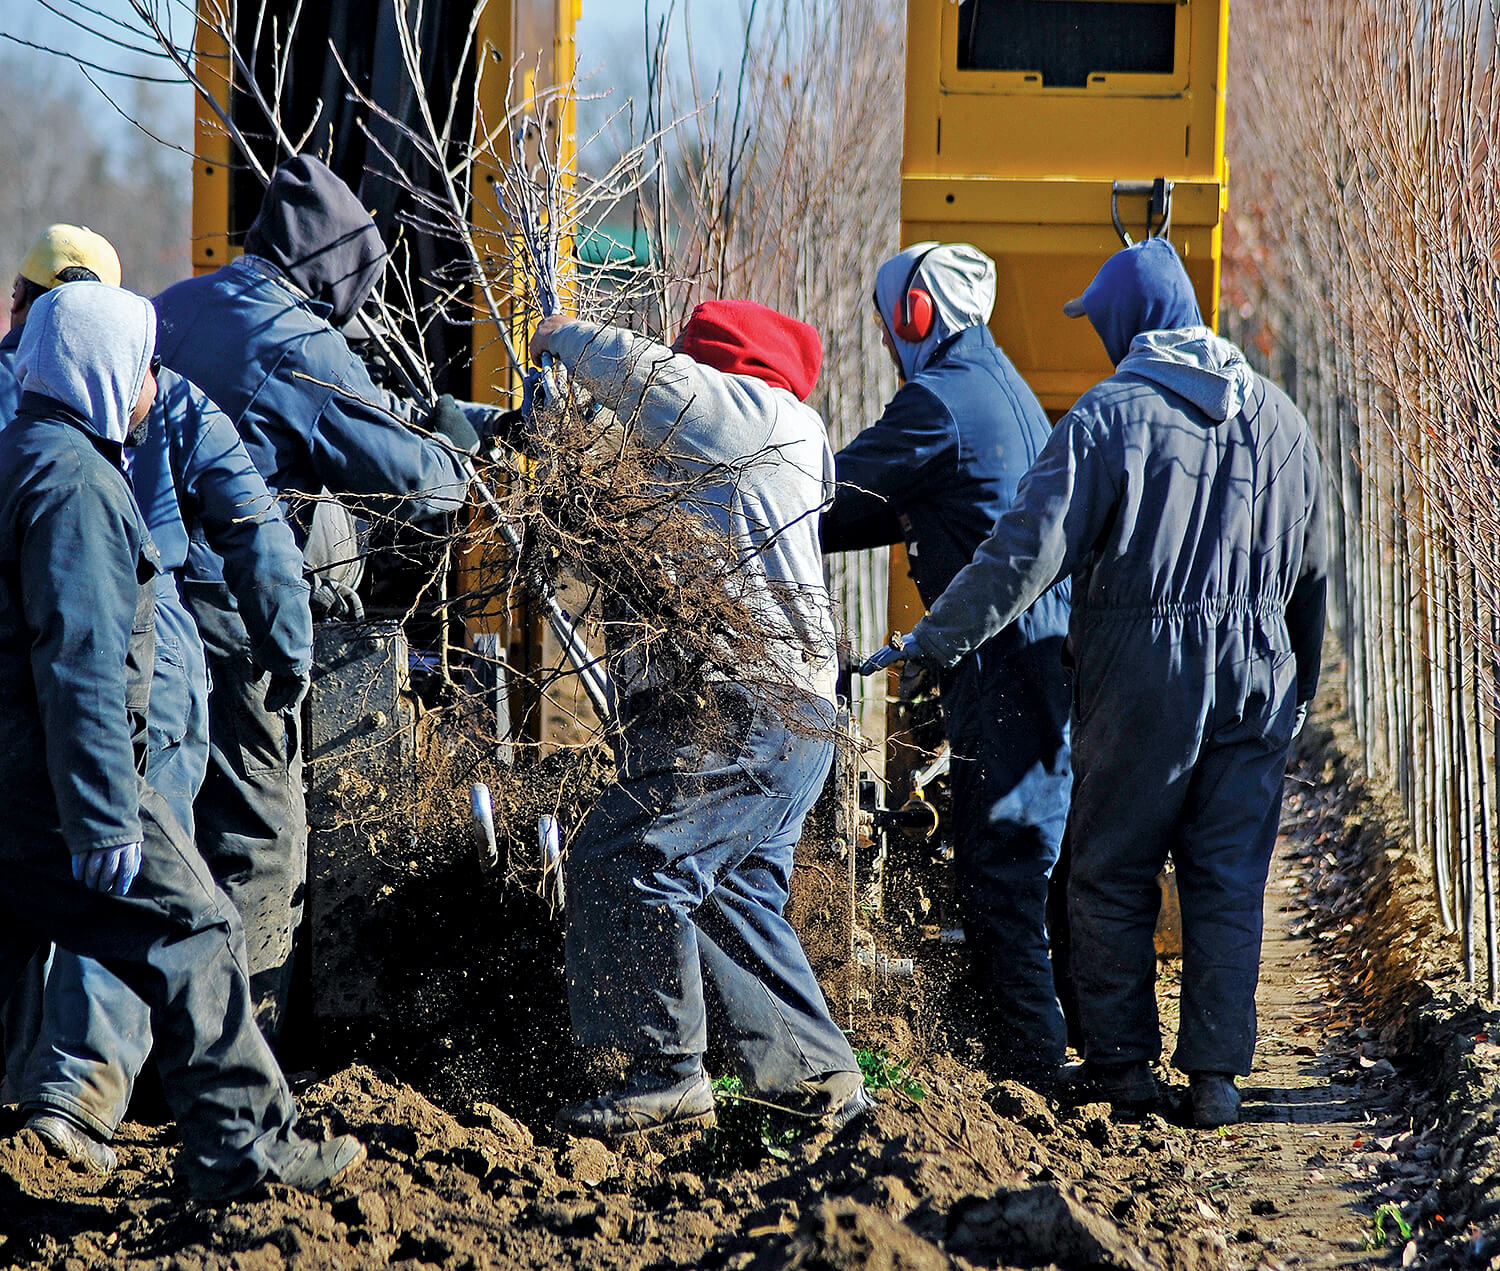 Foreign workers planting a tree in a nursery field